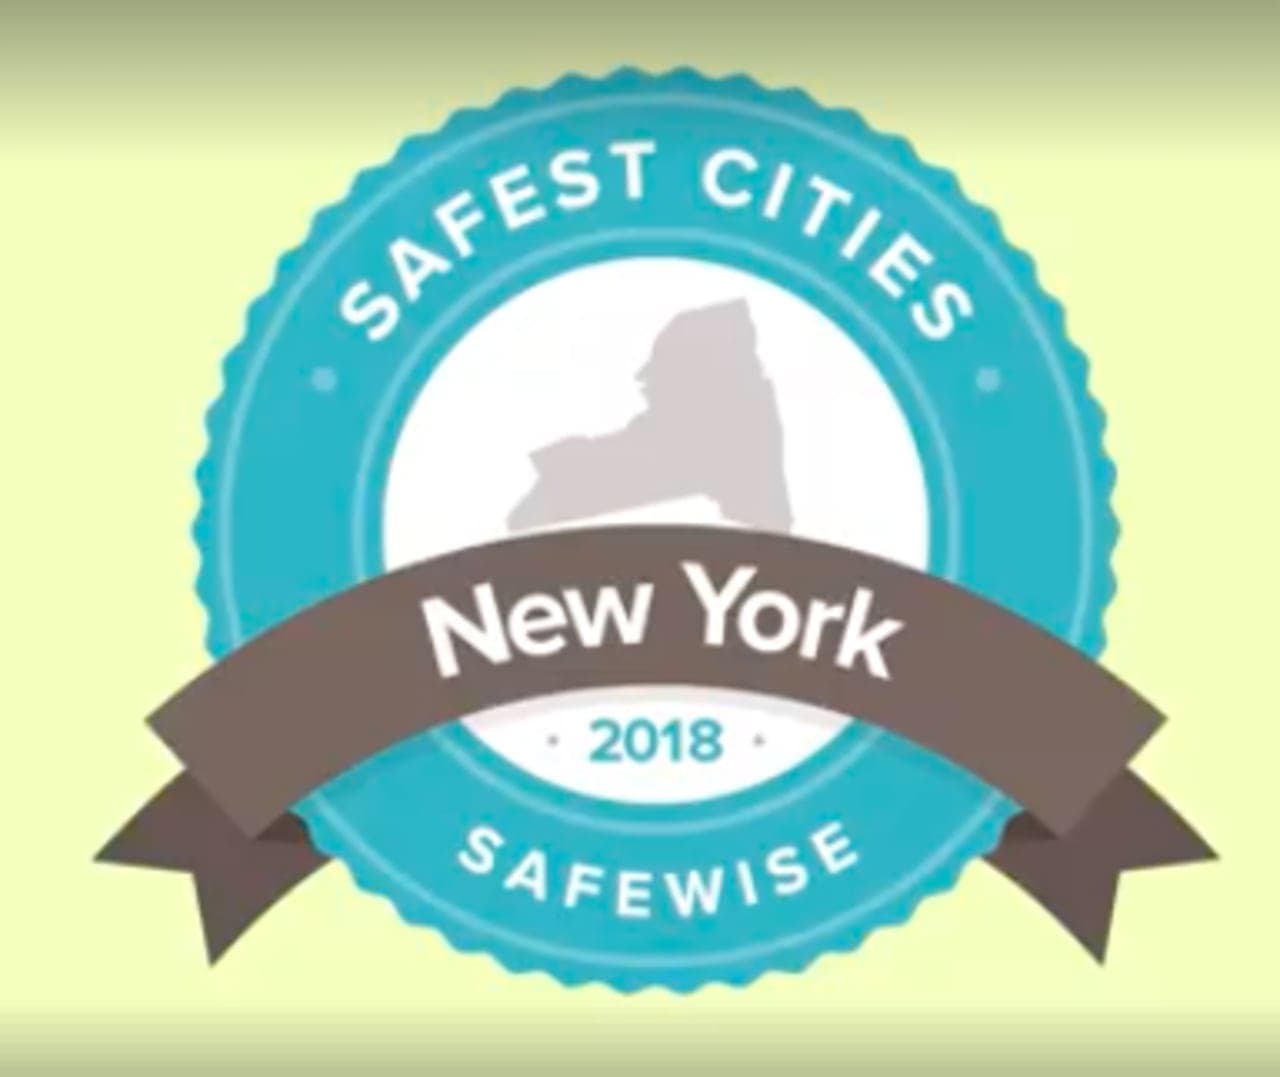 Safewise released its 2018 list of safest cities in New York.